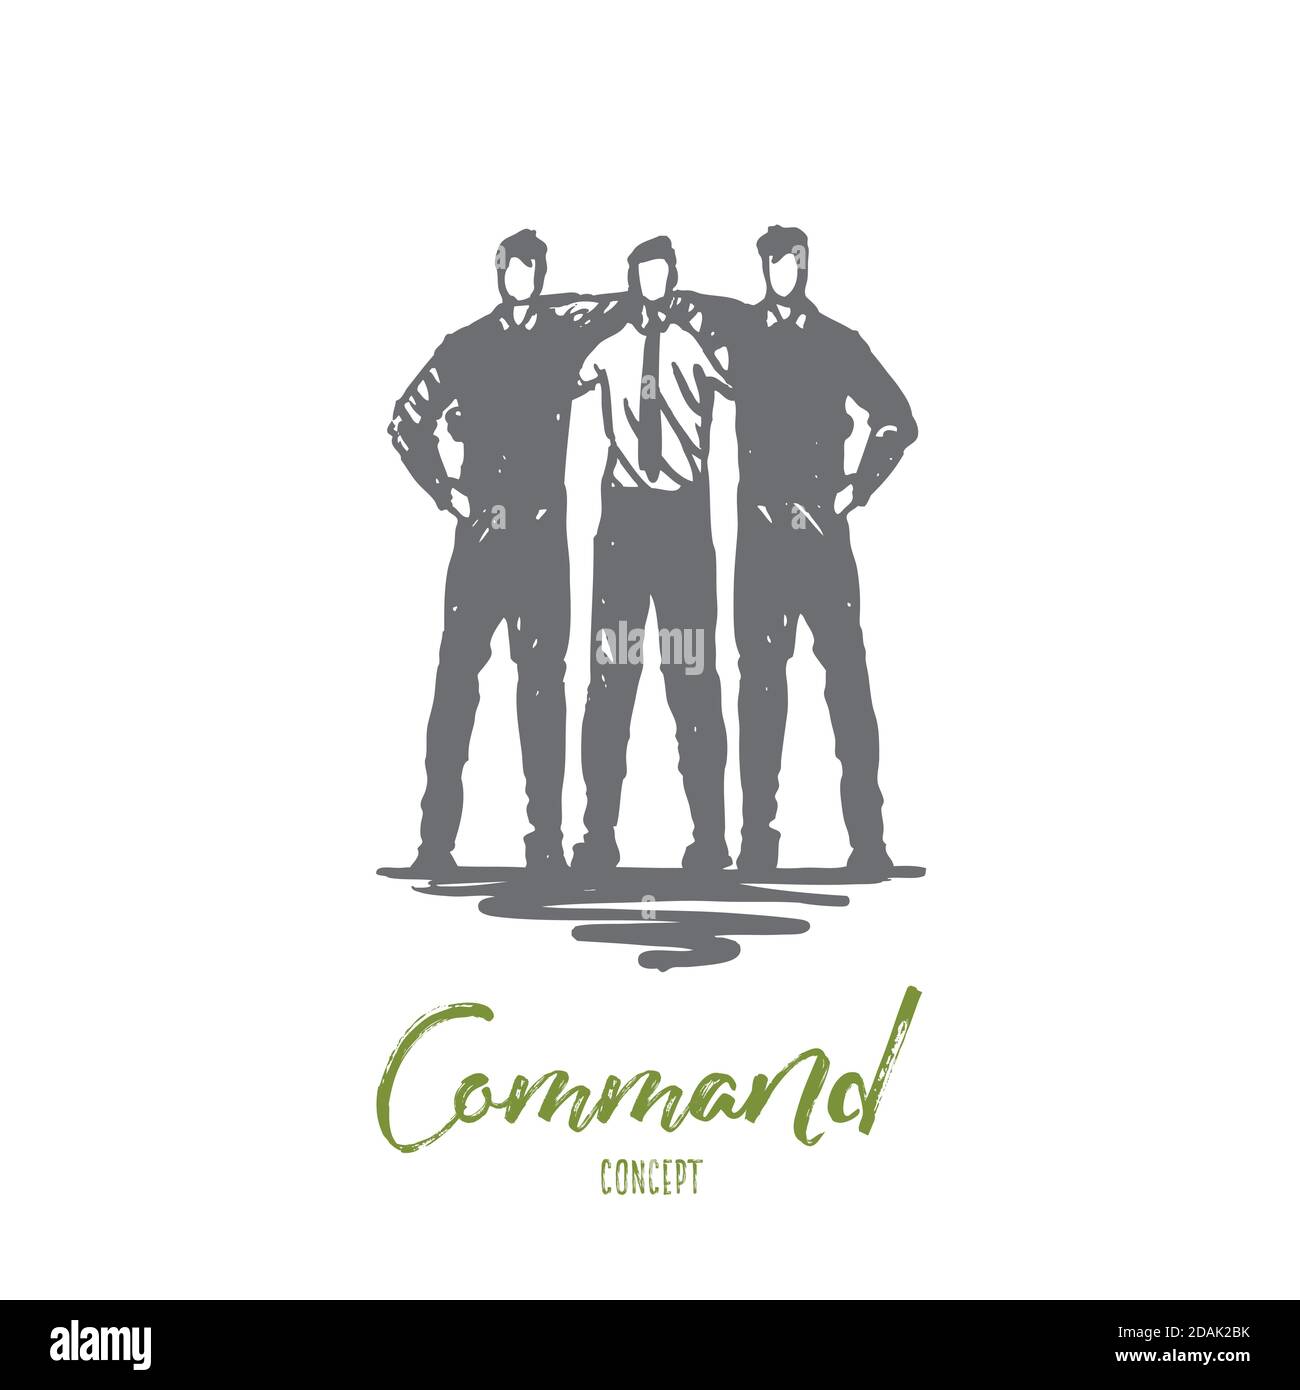 Command, team, friends, work, business concept. Hand drawn isolated vector. Stock Vector